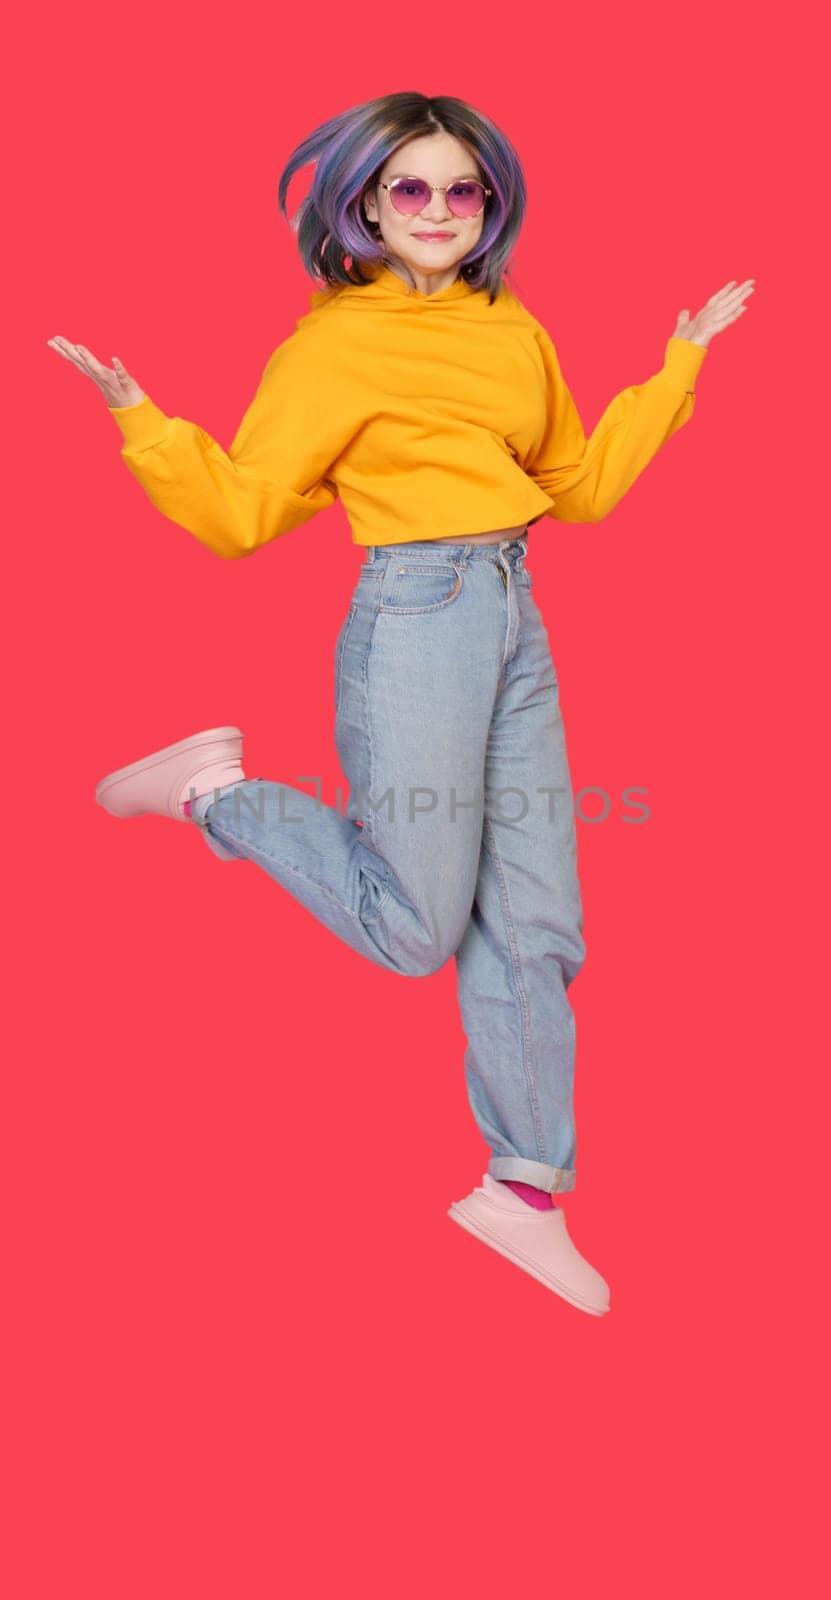 Smiling Asian girl teenager in mid-jump against vibrant red color background. Exuberance and happiness of youth, showcasing dynamic and lively nature of teenager in moment of pure joy and positivity. High quality photo